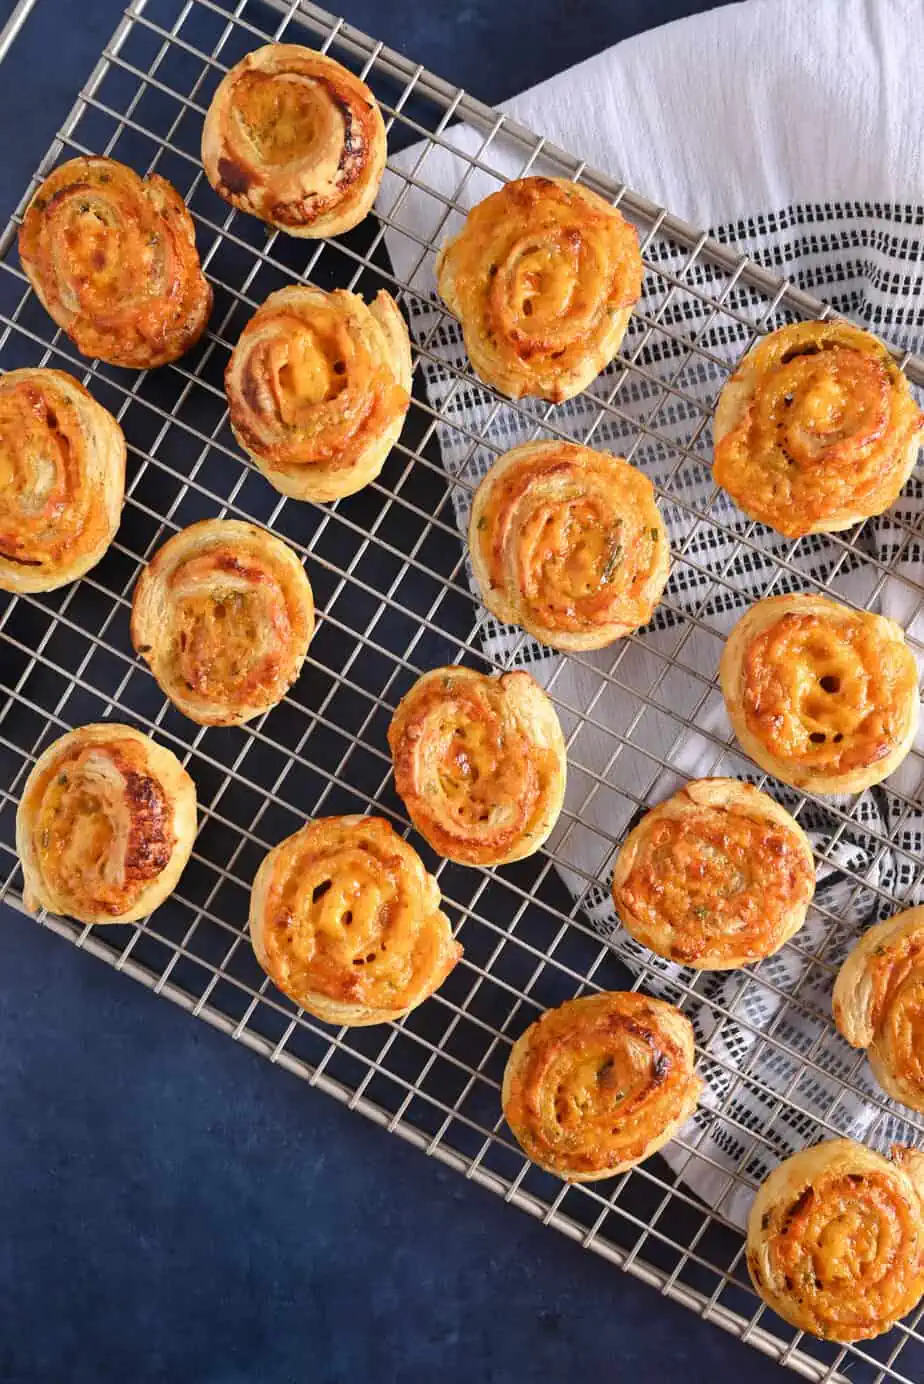 Hot ham and cheese pinwheels cooling on a wire rack.